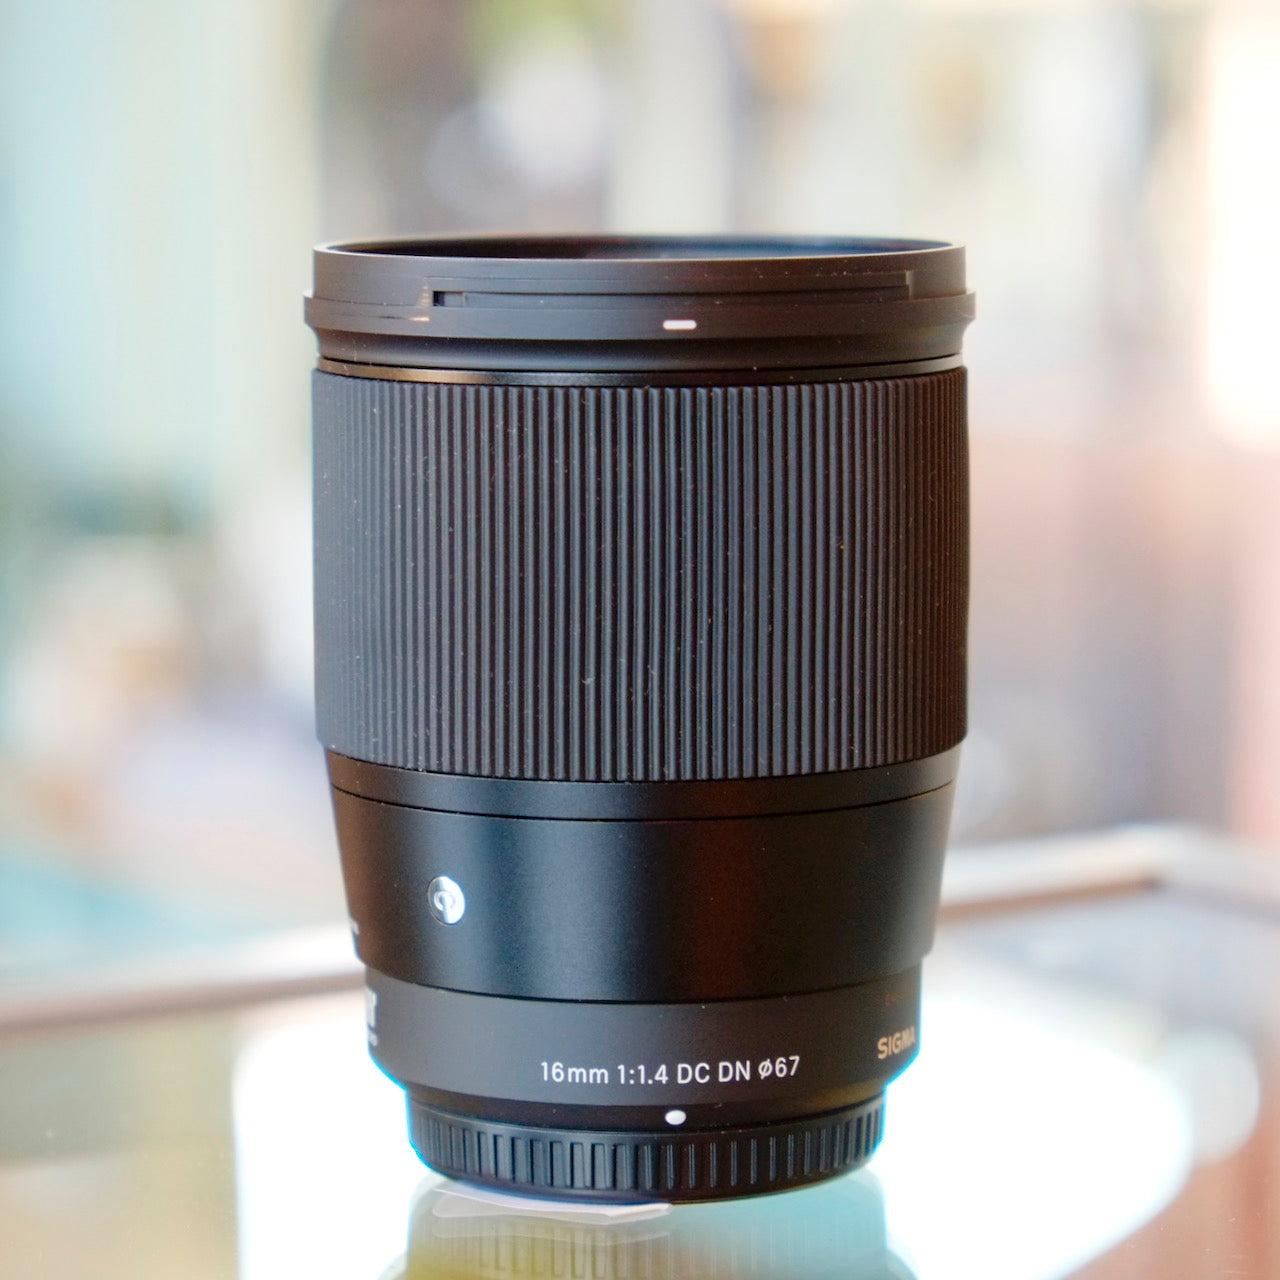 Sigma Contemporary 16mm f1.4 DC DN for Micro Four Thirds